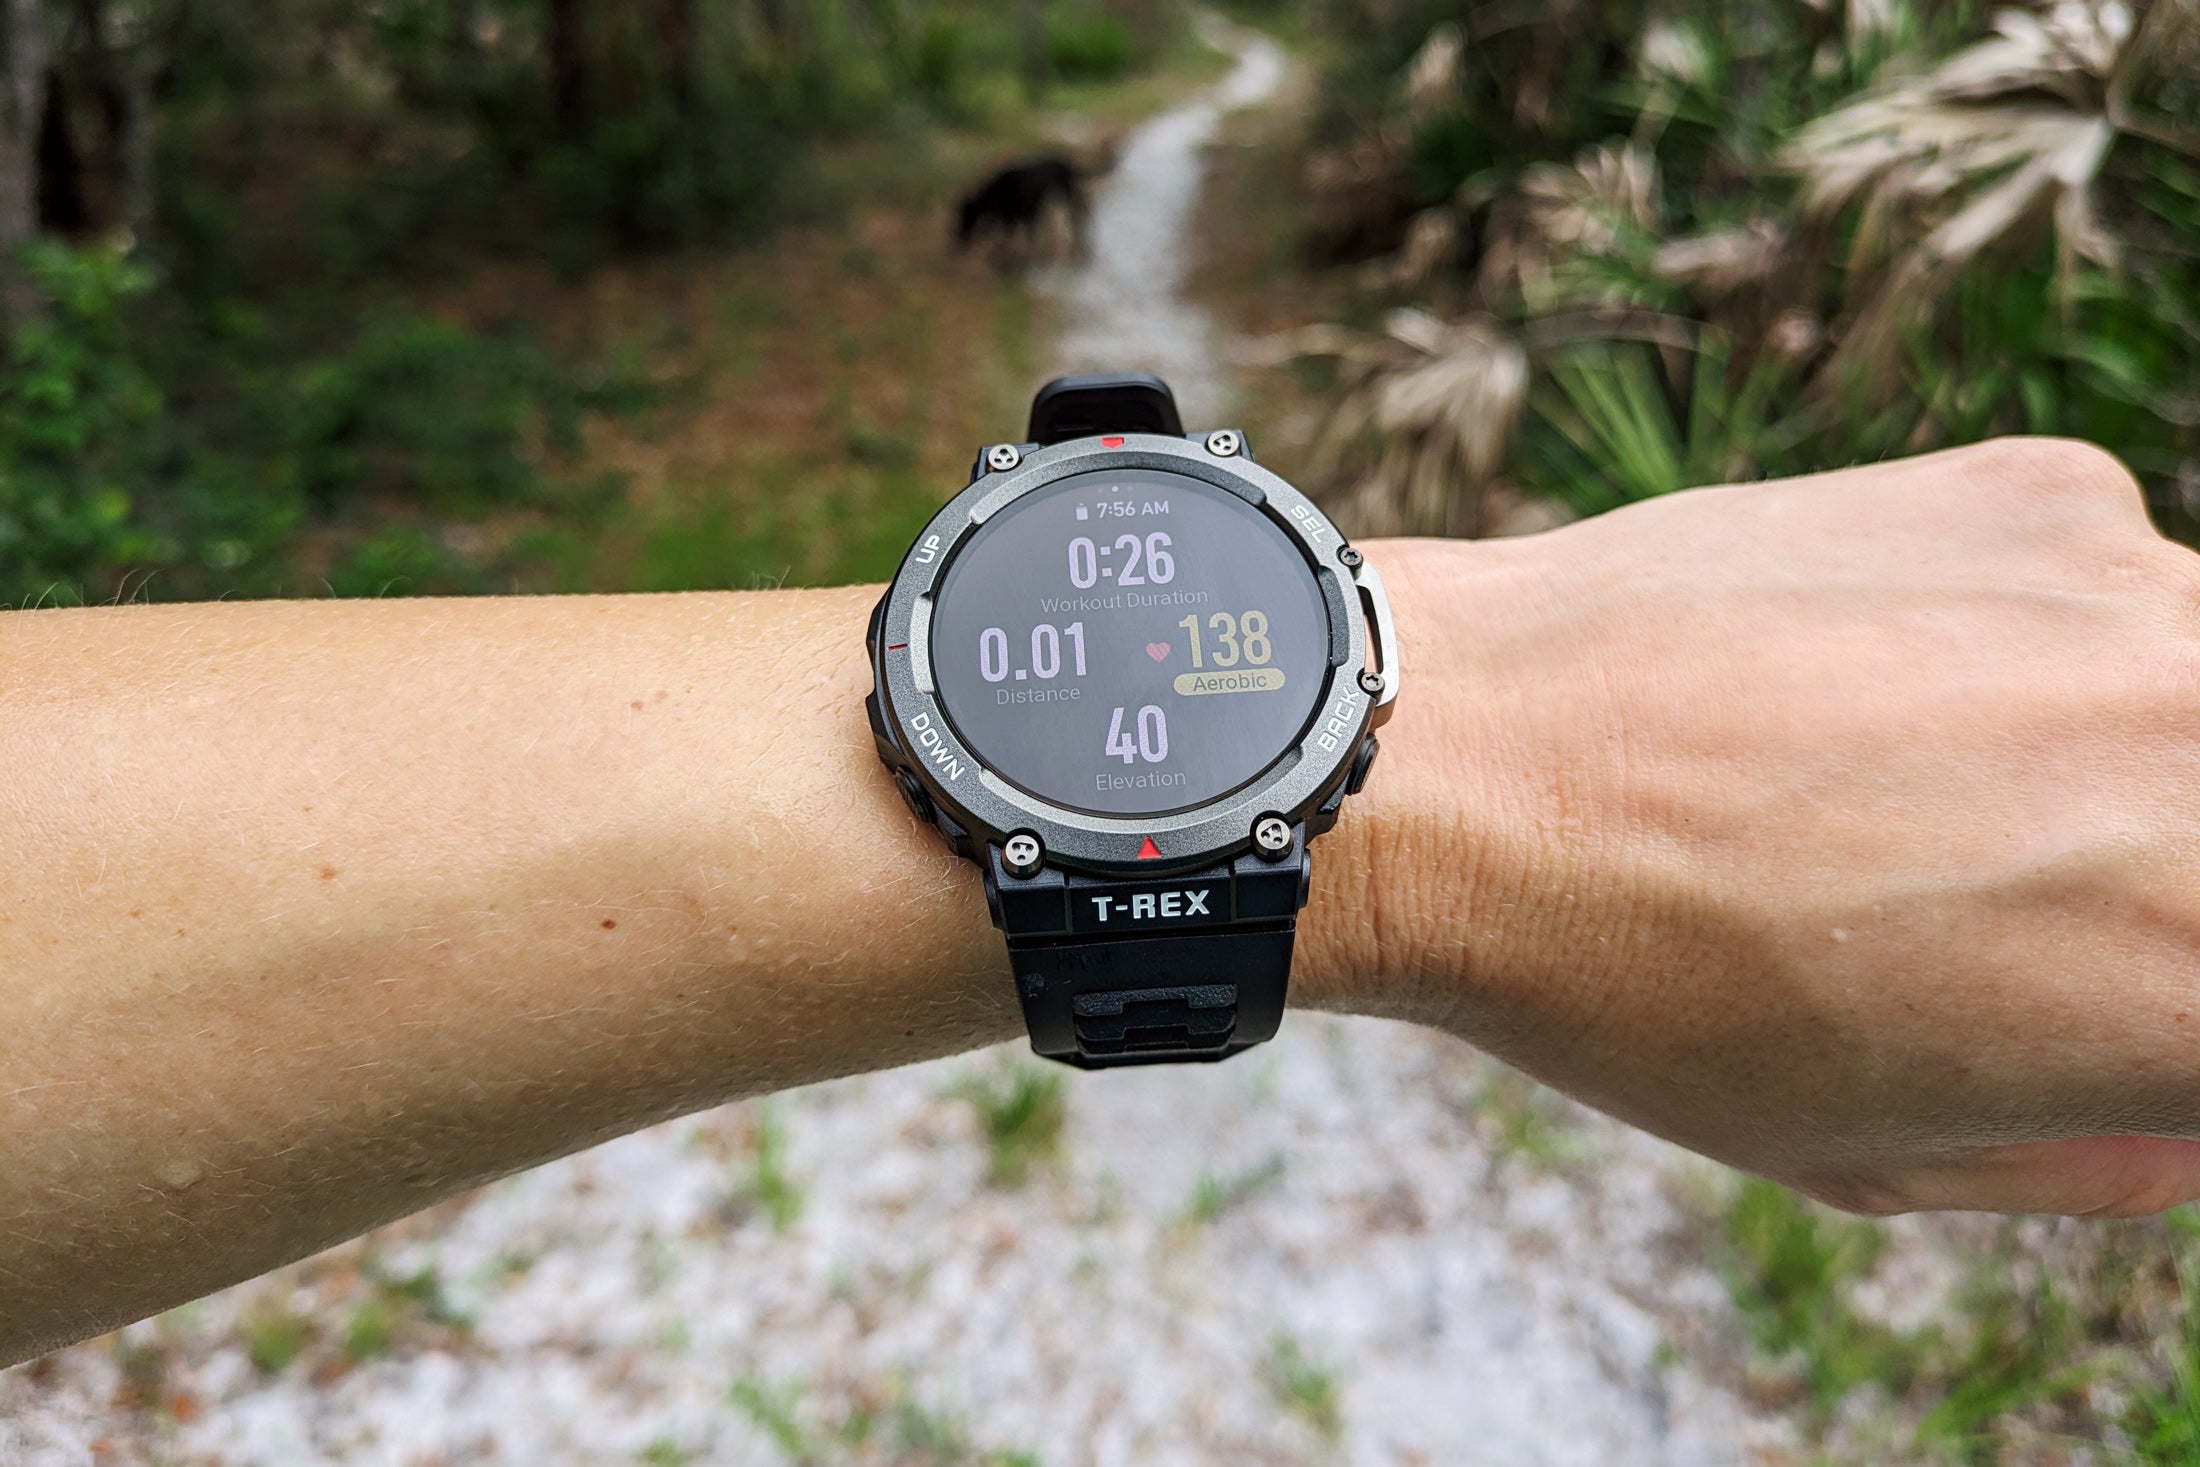 Amazfit T-Rex 2 hiking watch on a wrist in front of a trail through the woods